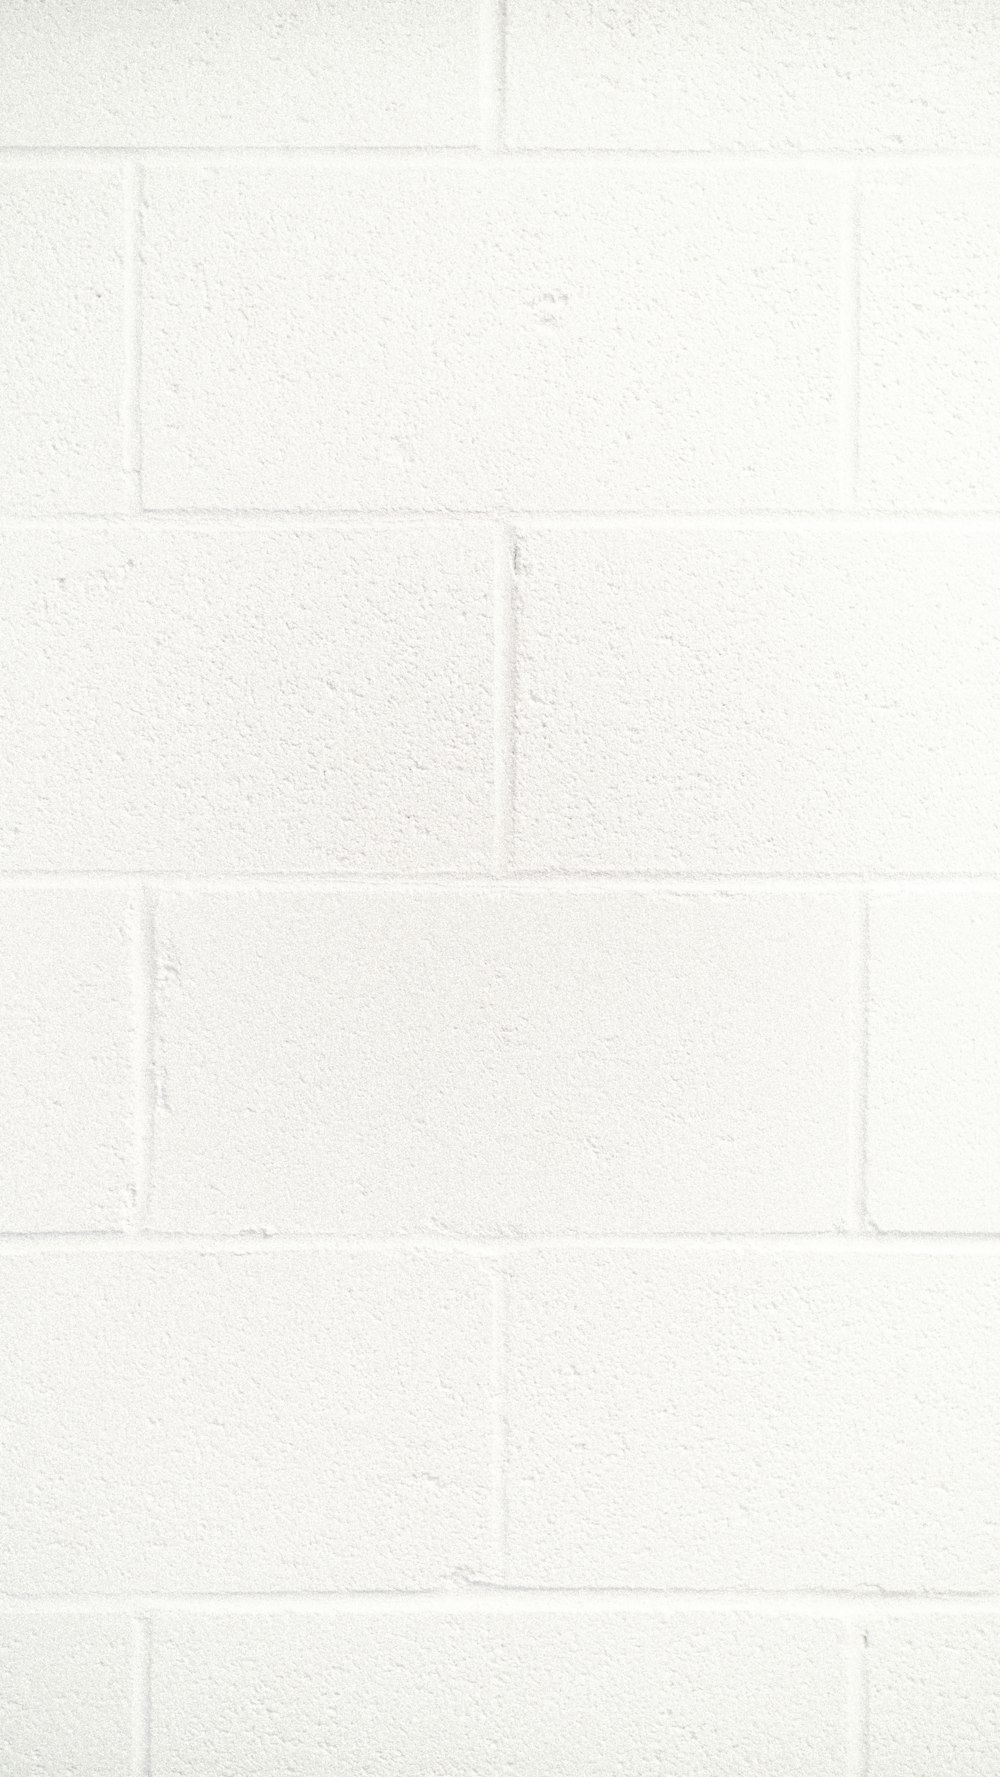 500 White Wall Pictures Hd Download Free Images On Unsplash